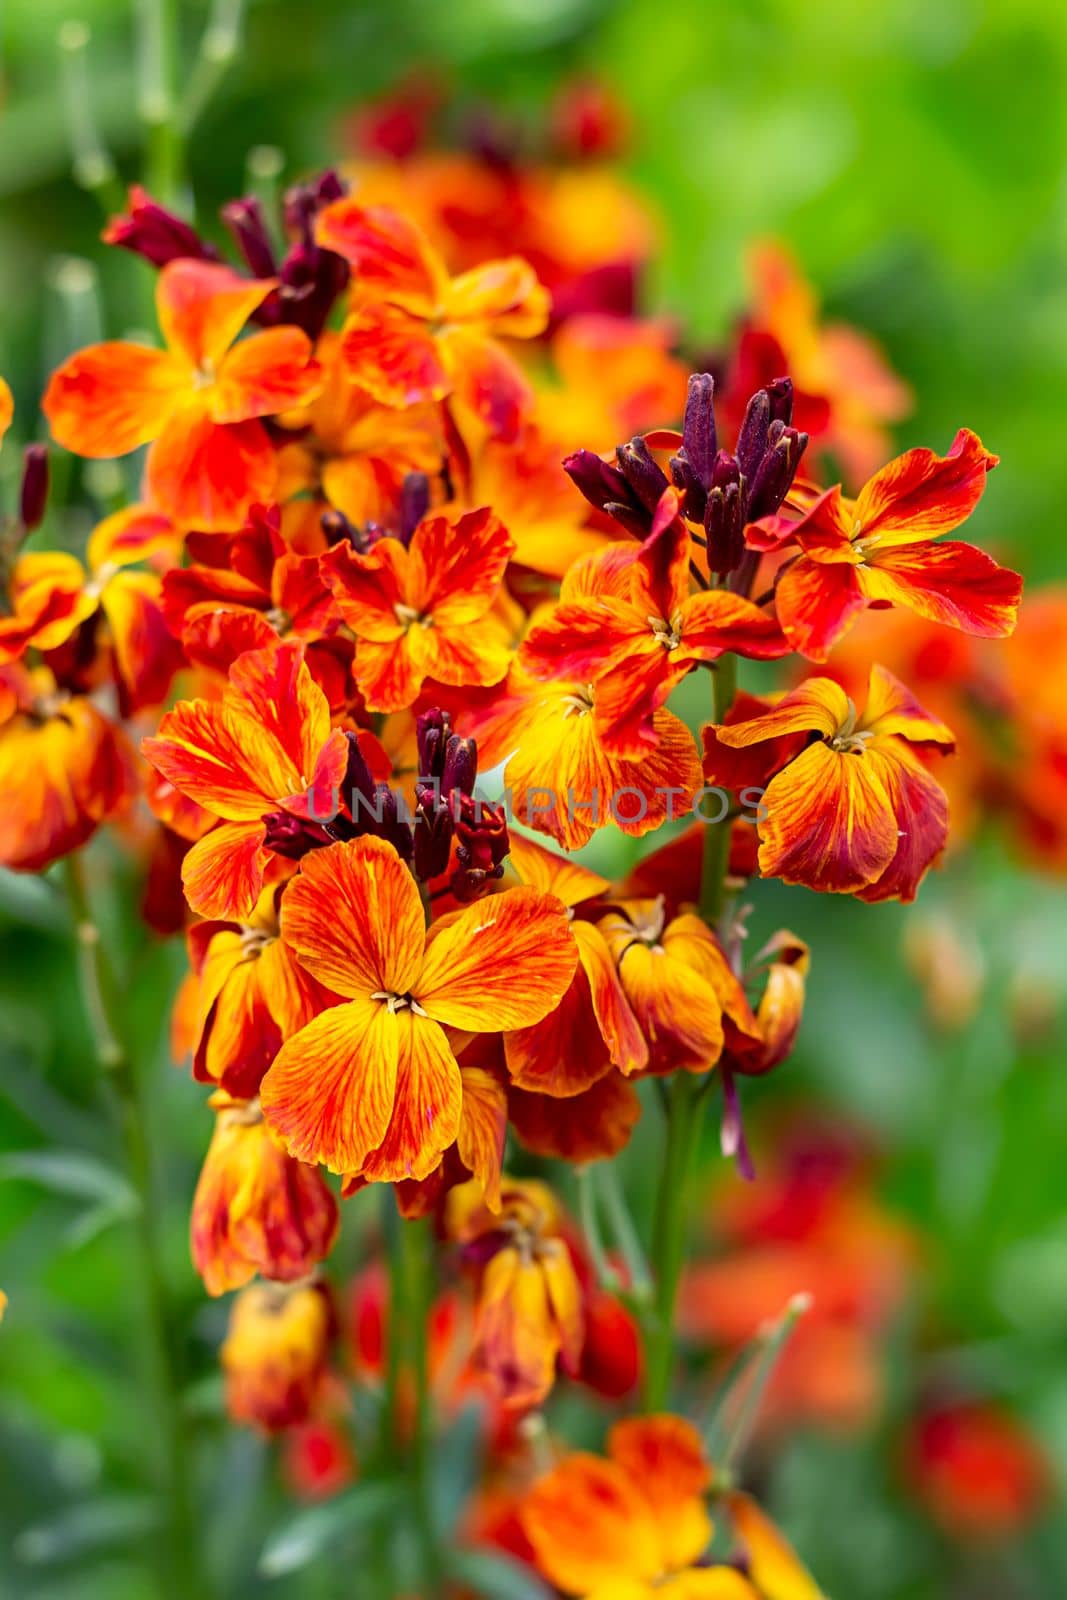 The brightly colored spring flowers of Erysimum cheiri (Cheiranthus) also known as the Wallflower. Vertical view by EdVal